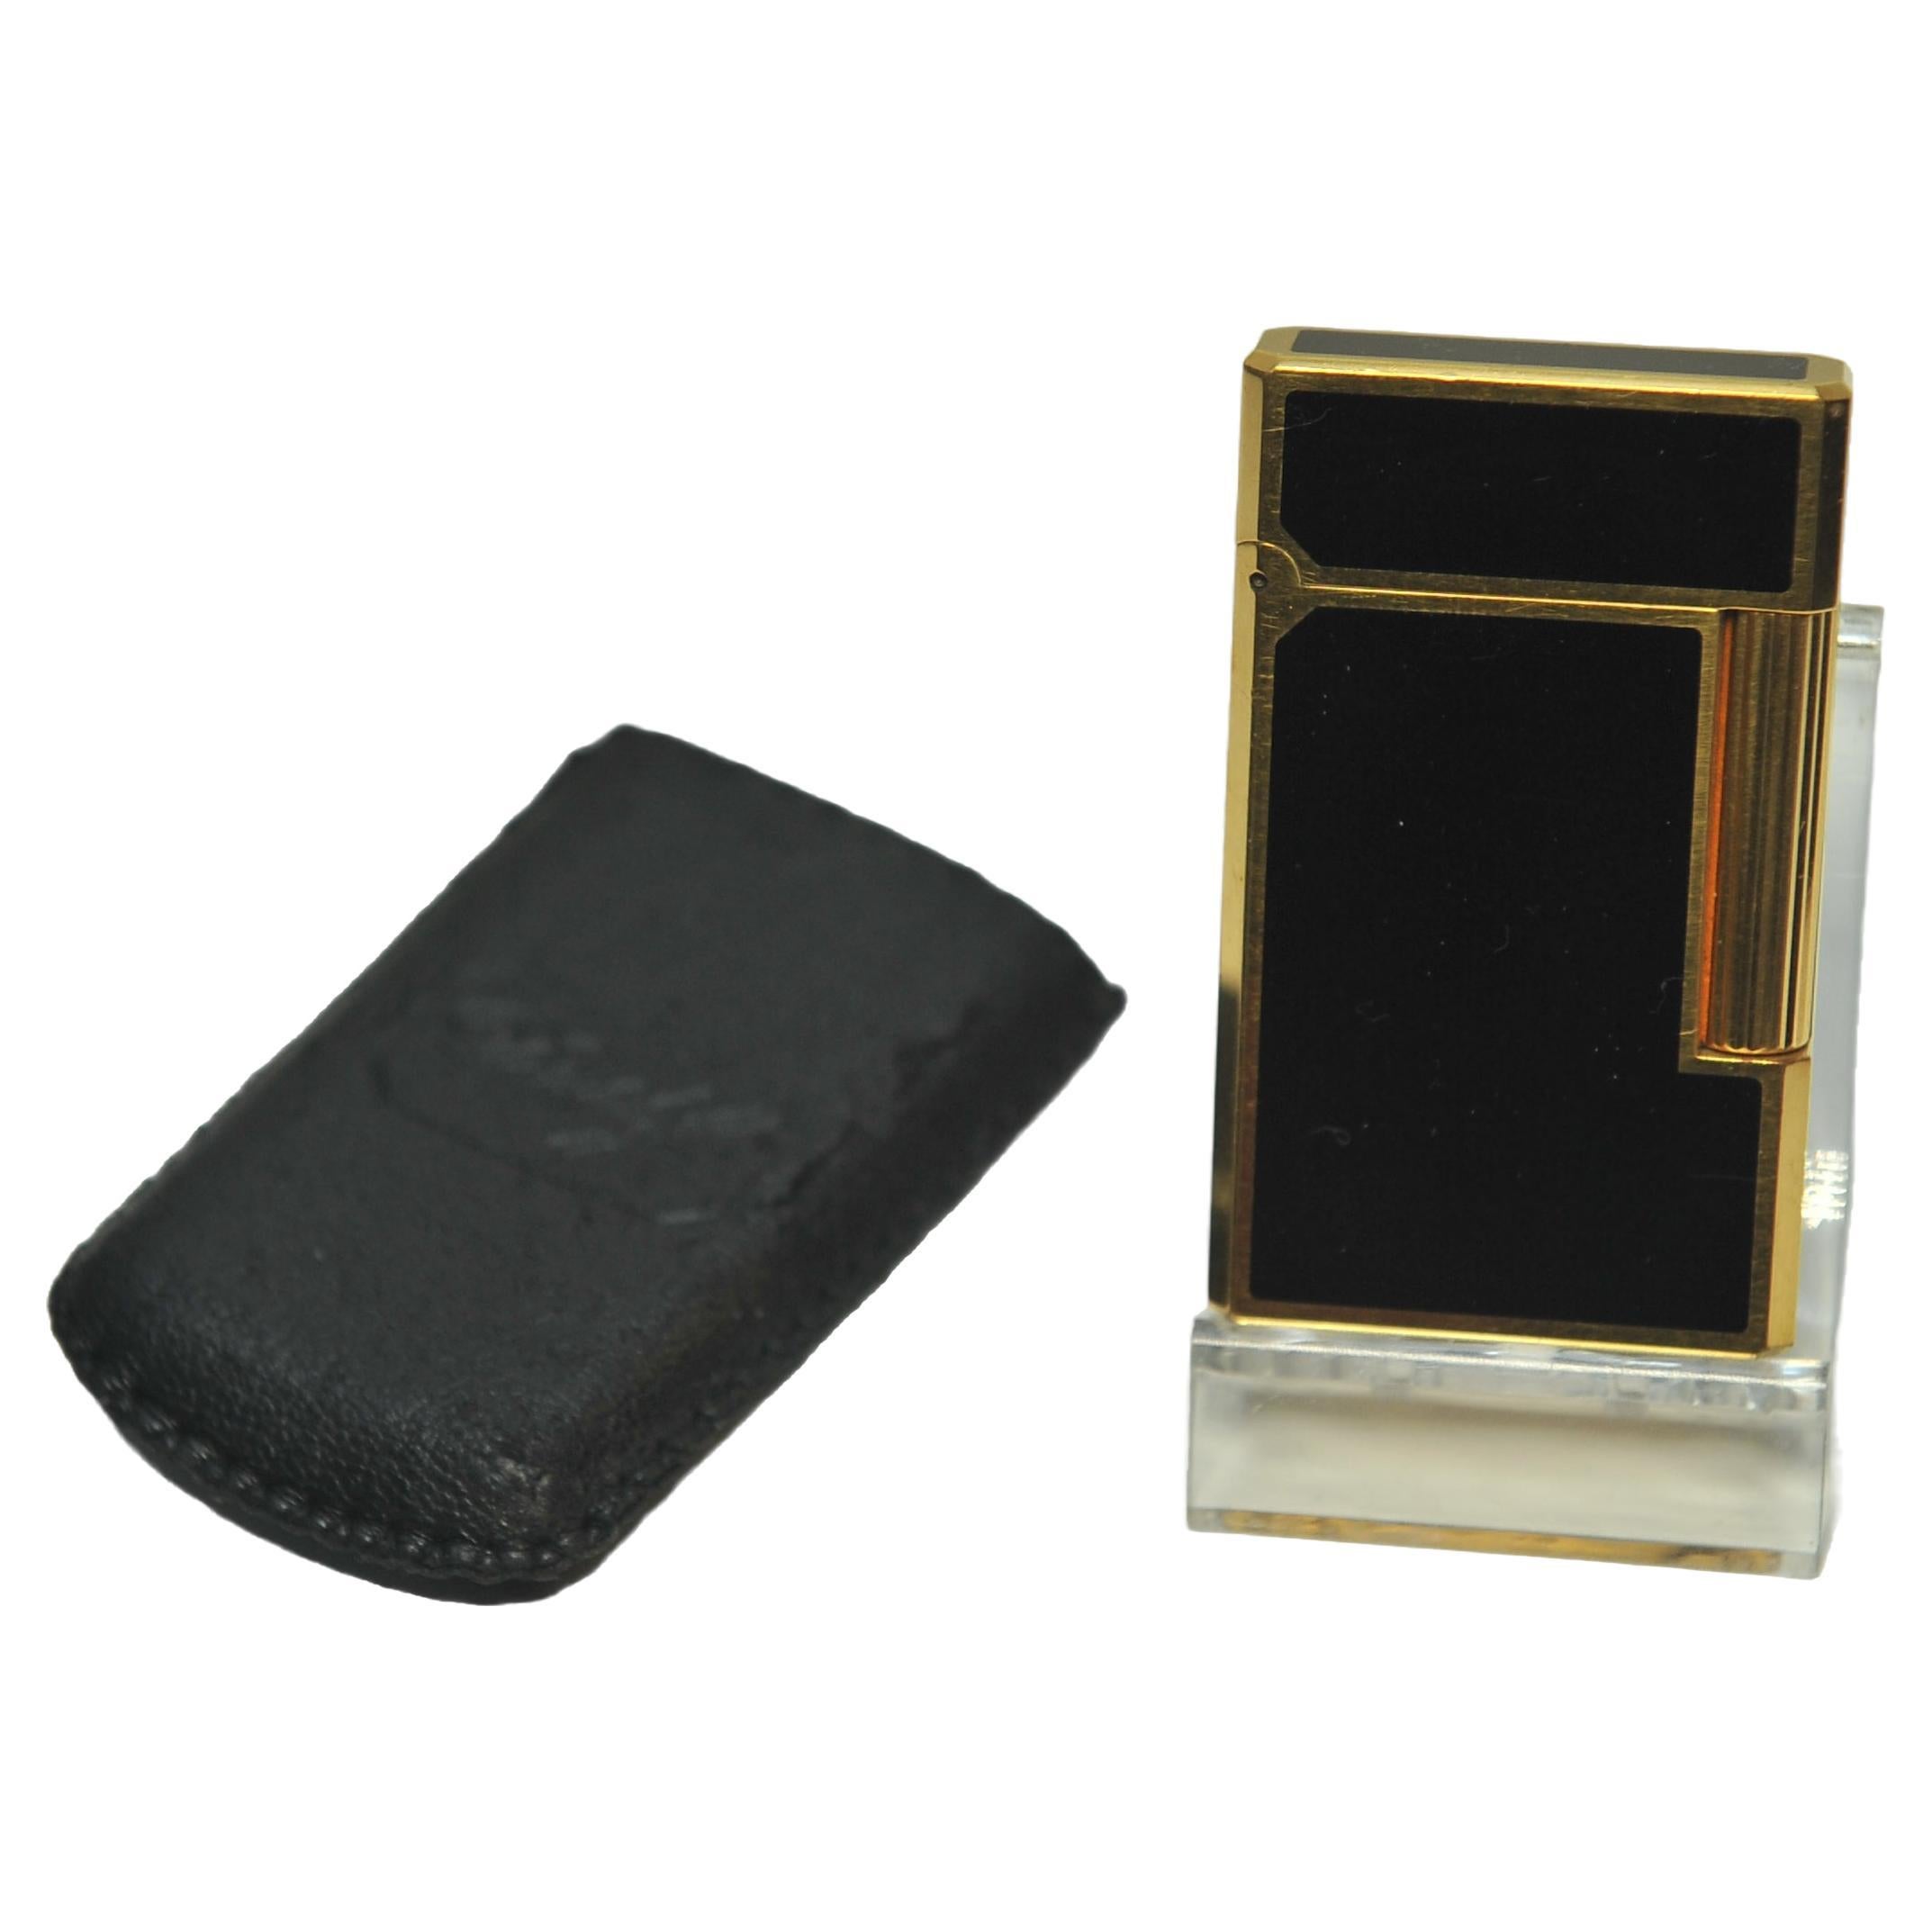 French Davidoff Laque De Chine Pocket Cigarette Lighter Made in France Stamped 1E9DY06  For Sale